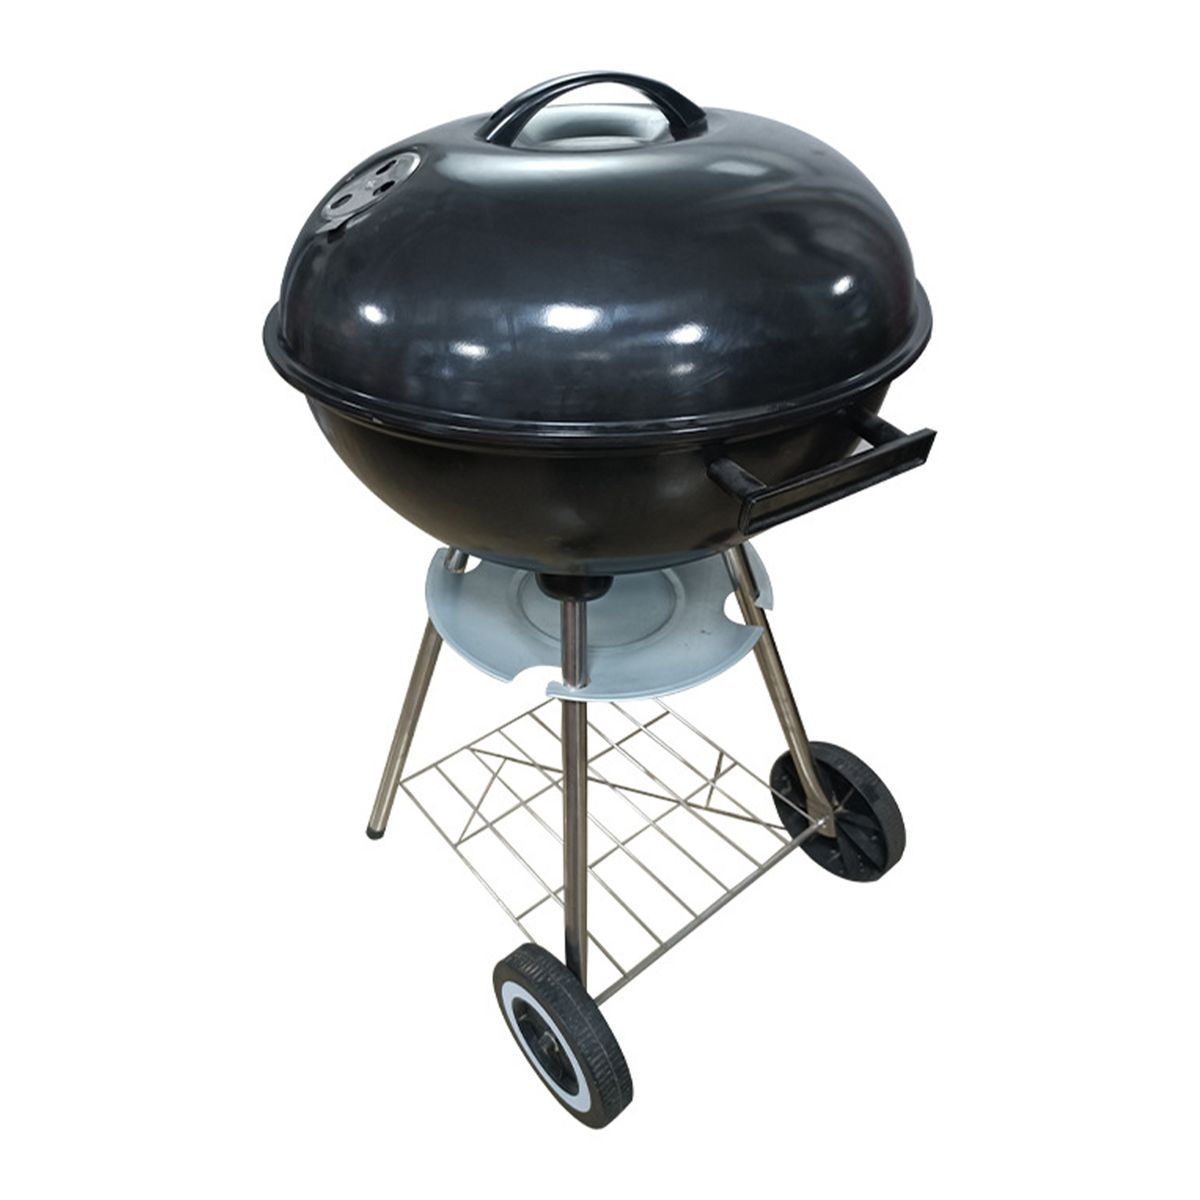 Portable Charcoal BBQ Grill Outdoor Grilling with Lid Picnic Camping Patio